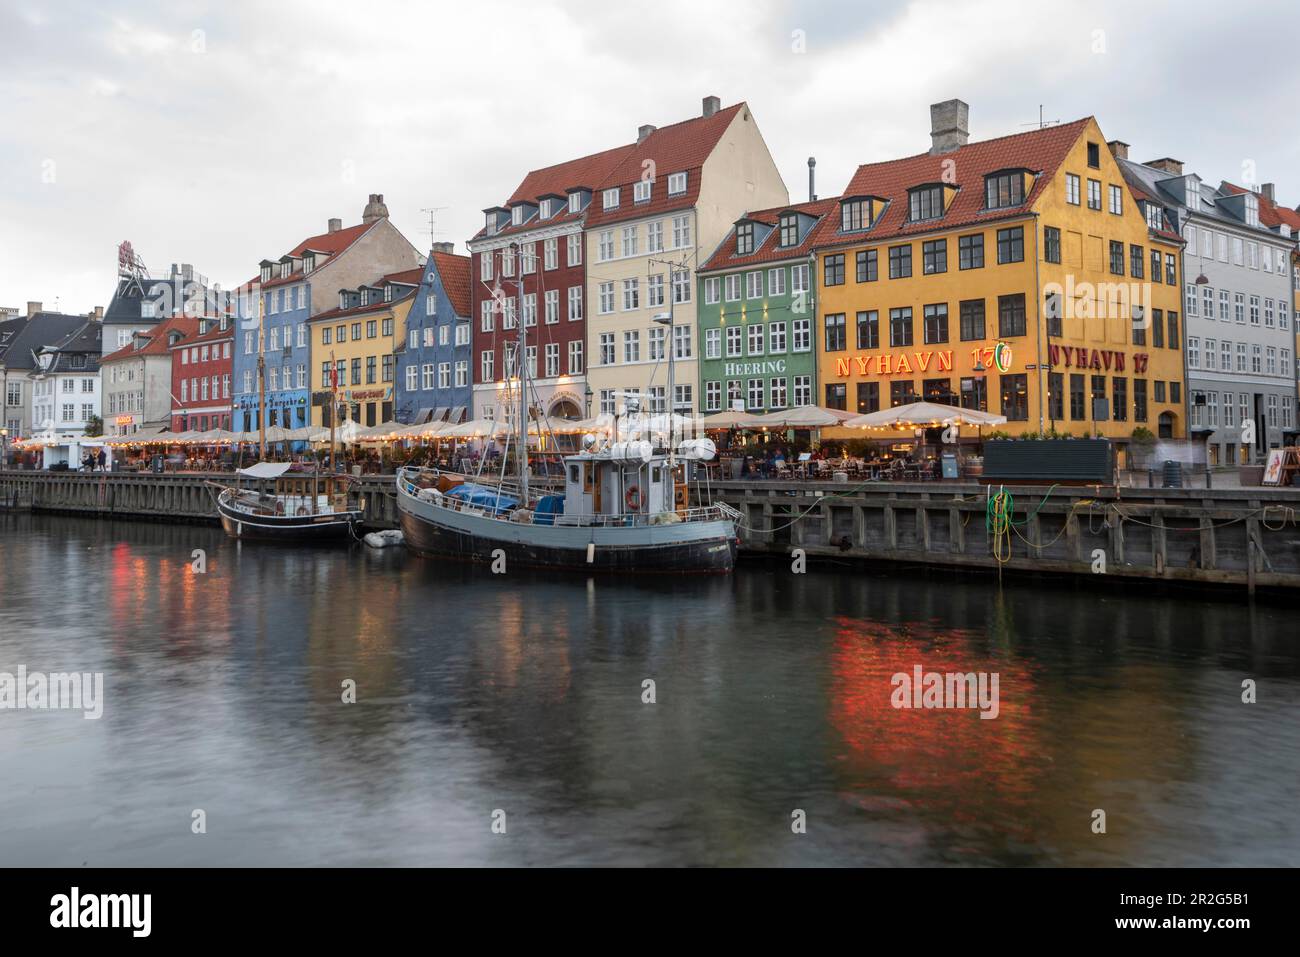 Nyhavn, harbour with colourful houses, one of the most popular sights in Copenhagen, Denmark Stock Photo